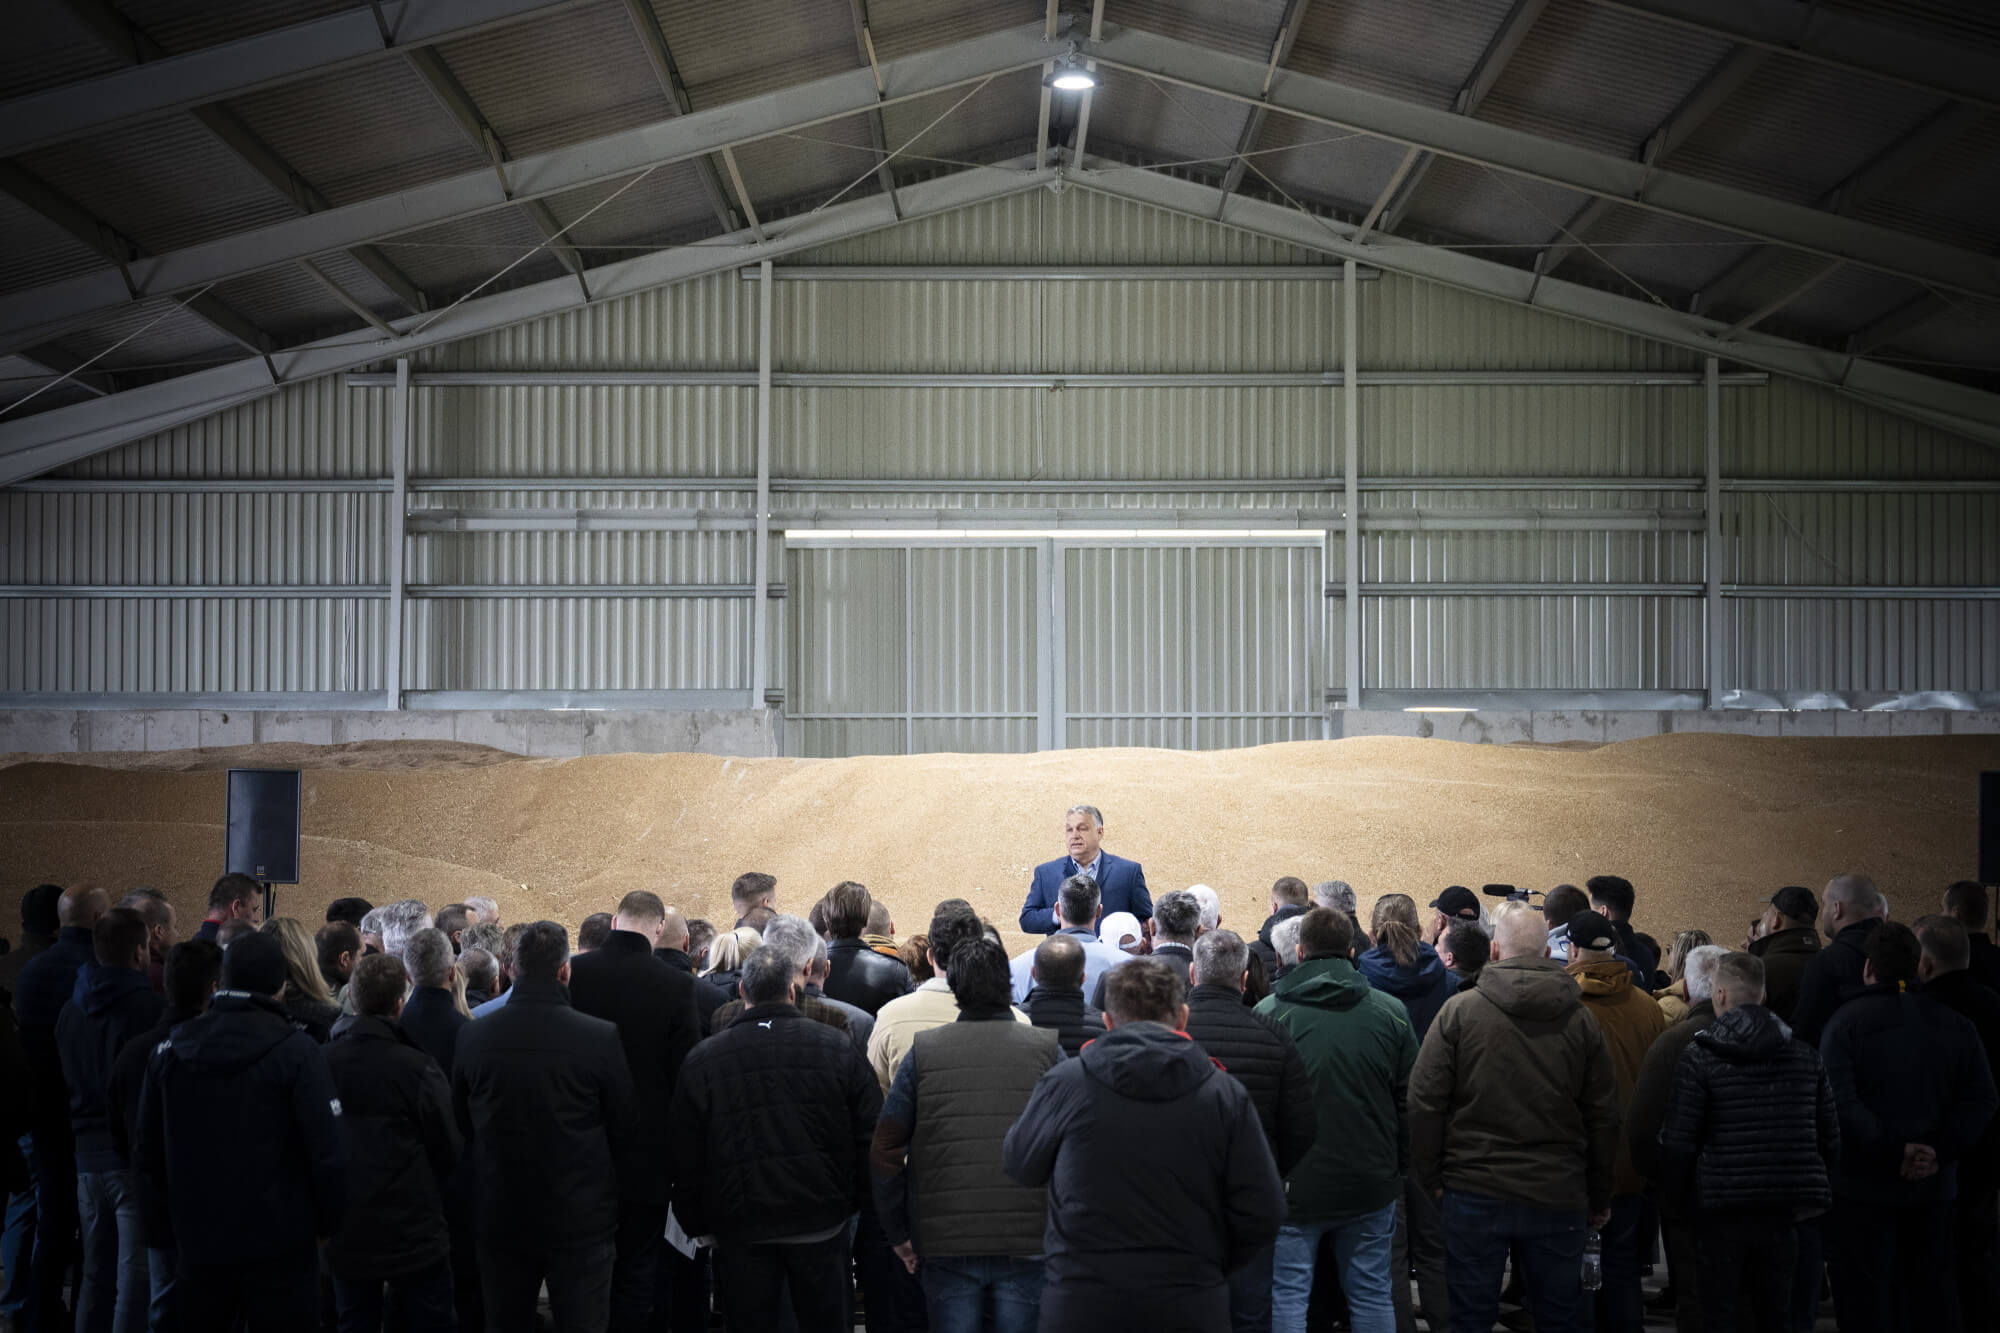 Orbán on Tour: “First Hungarian Prime Minister to Come From a Village” Meets Rural Farmers